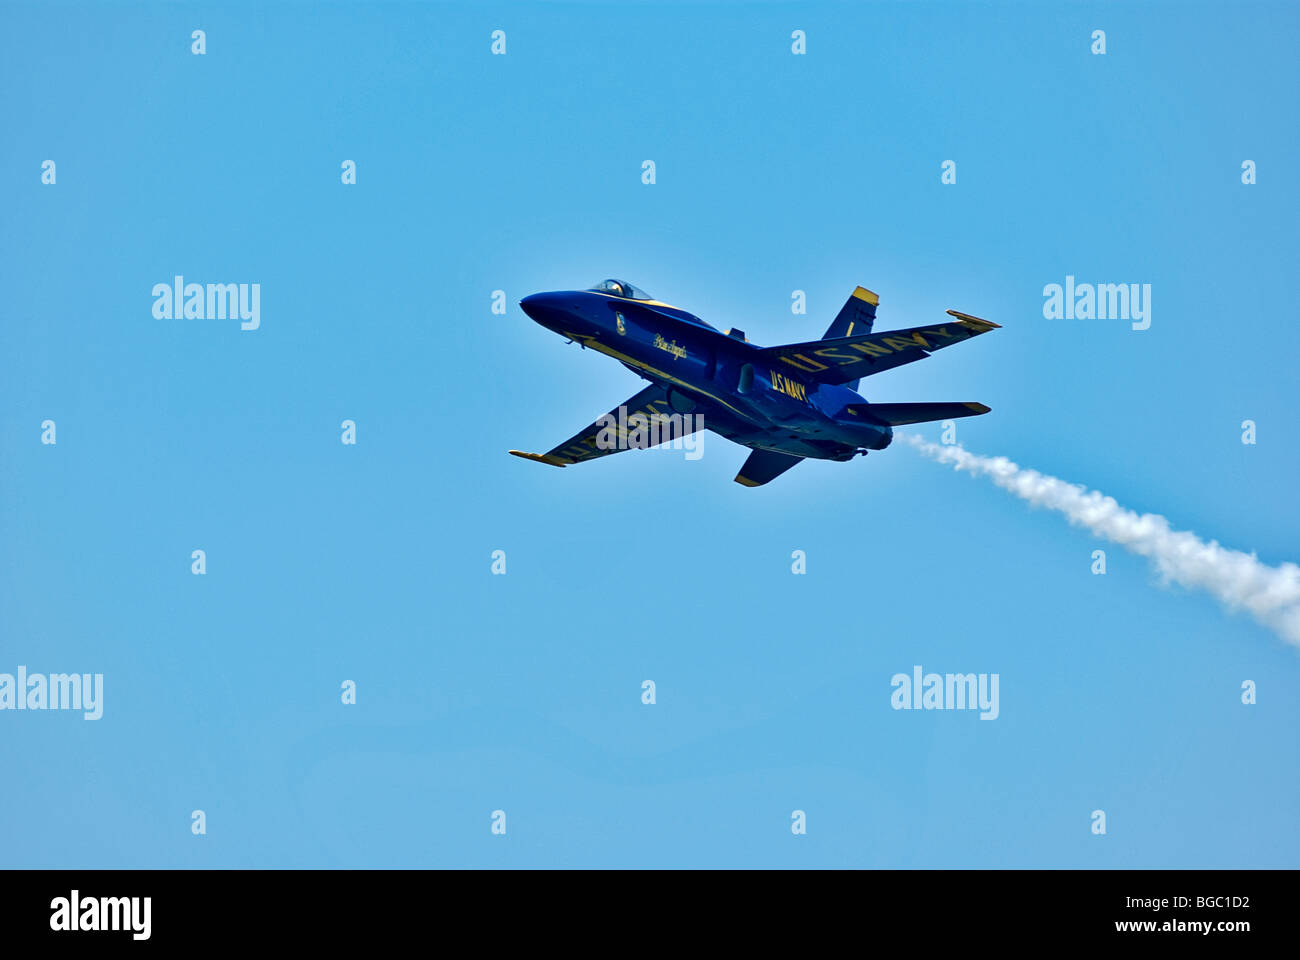 USA, WA, Seattle, The Blue Angels, Navy precision flying team; one F/A-18 Hornet aircraft. Stock Photo